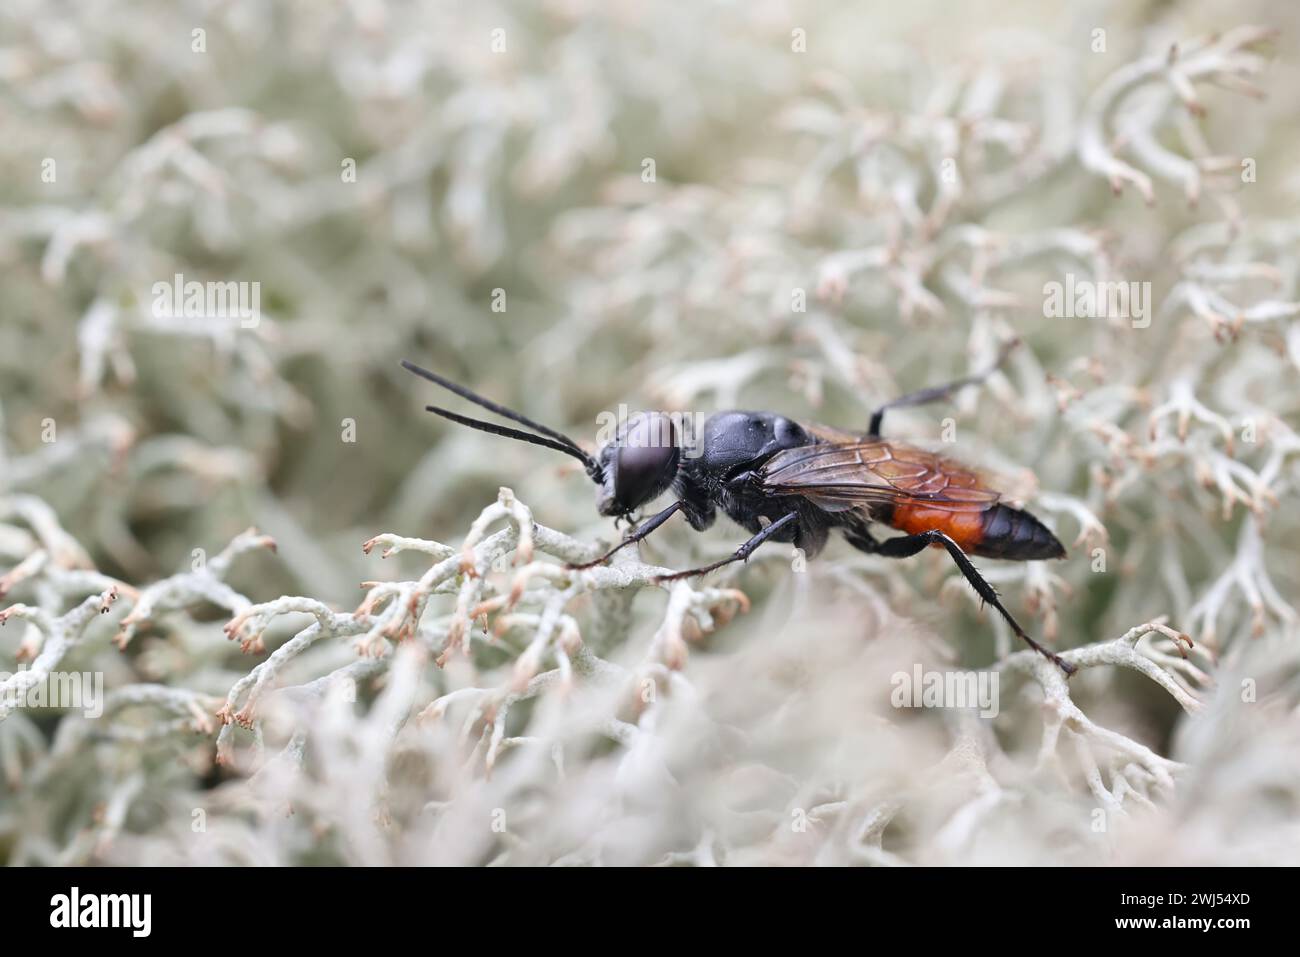 Astata boops, commonly known as shieldbug digger or shieldbug stalker, male parasitic wasp from Finland Stock Photo